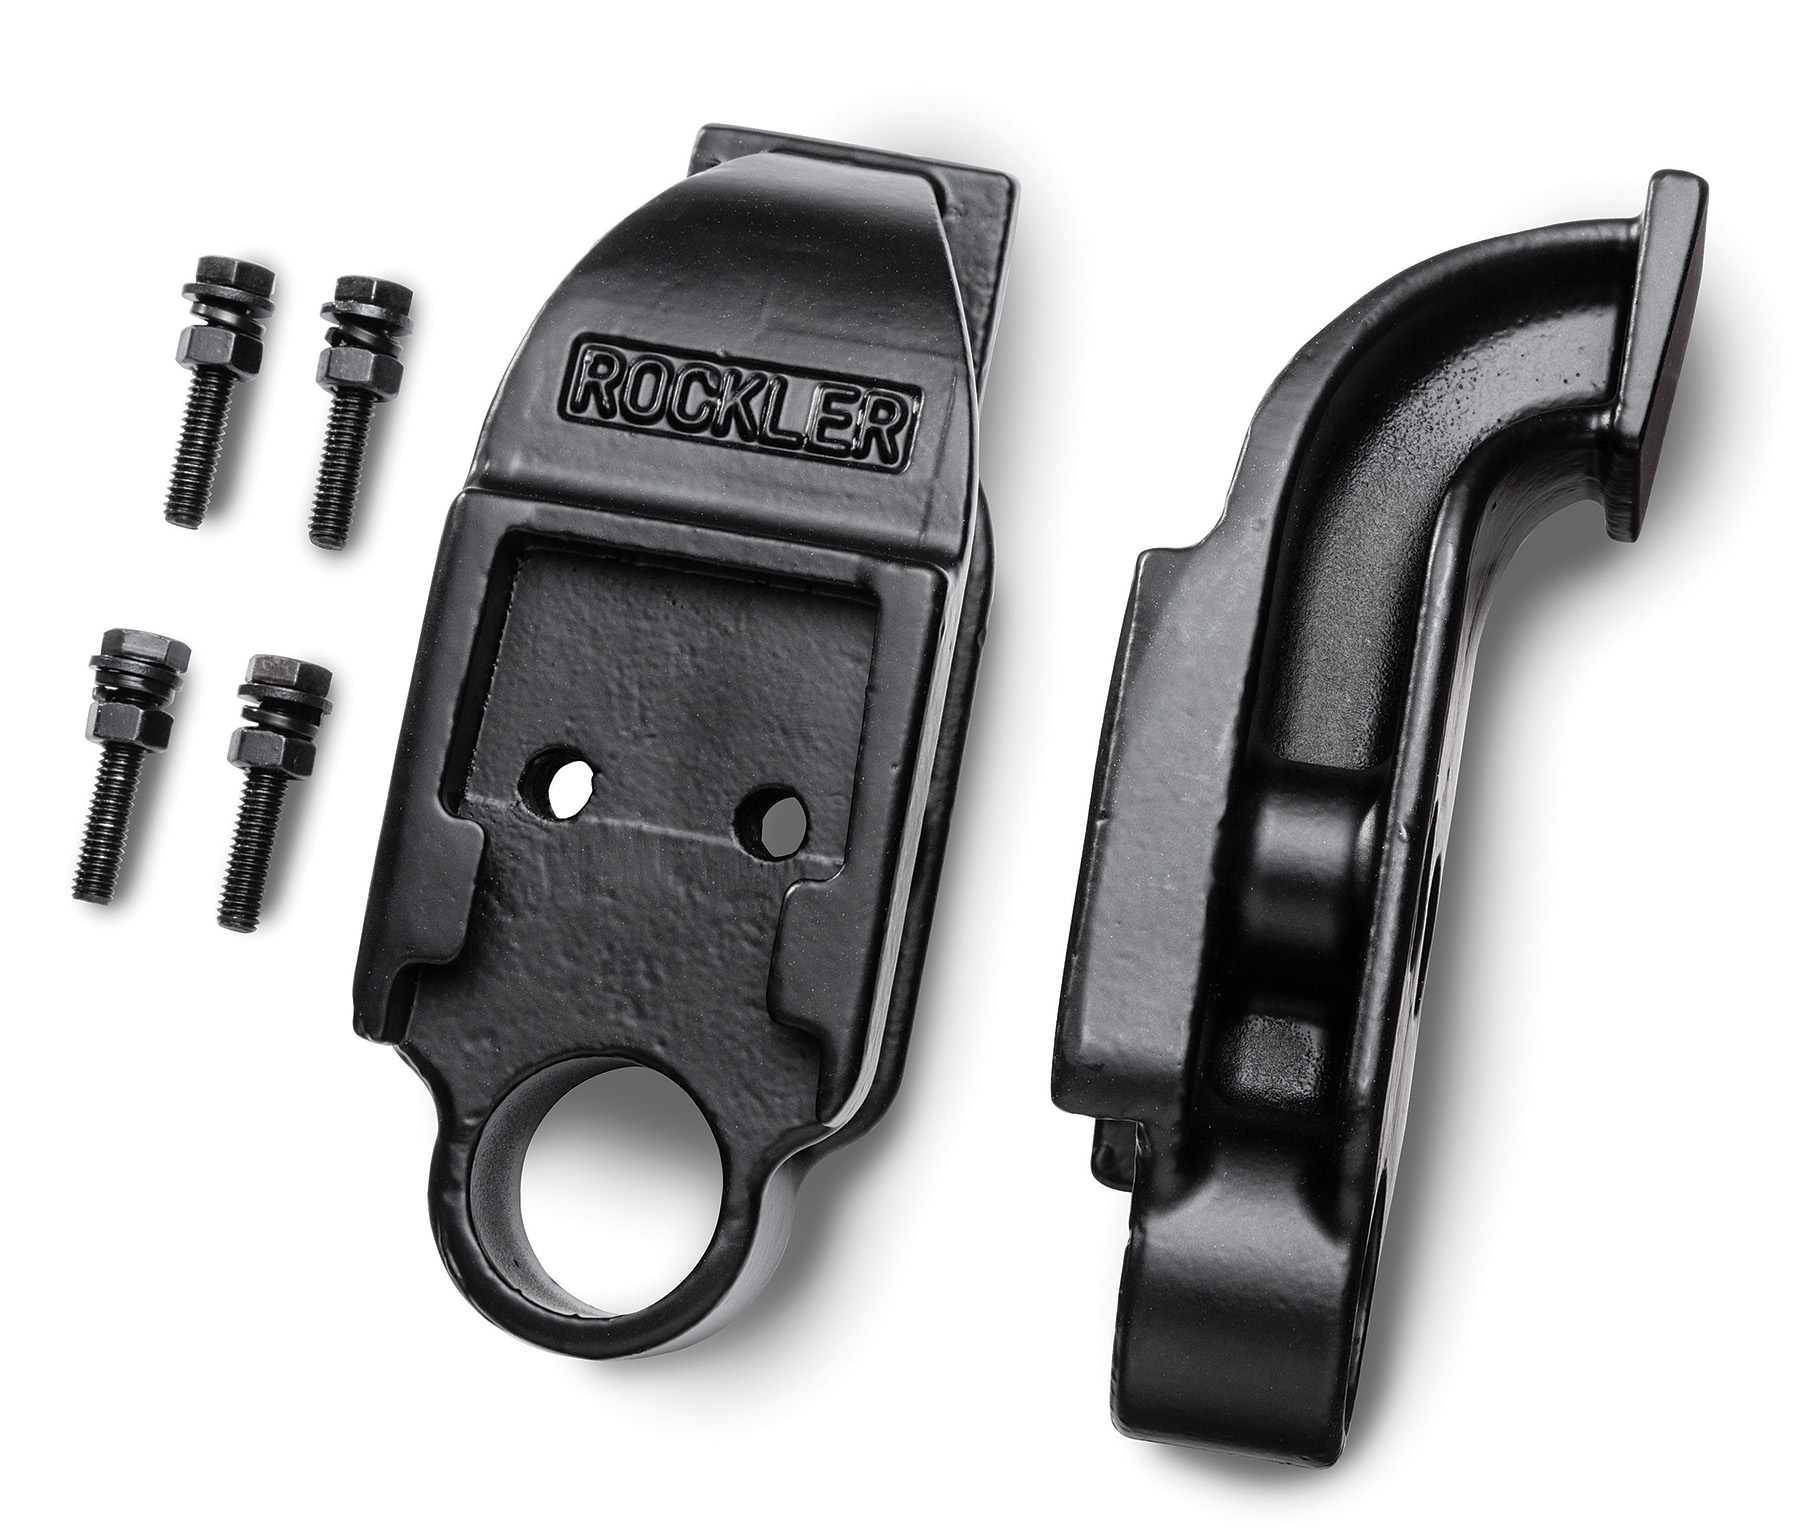 Rockler Boosts Pipe Clamp Range and Versatility With New ...